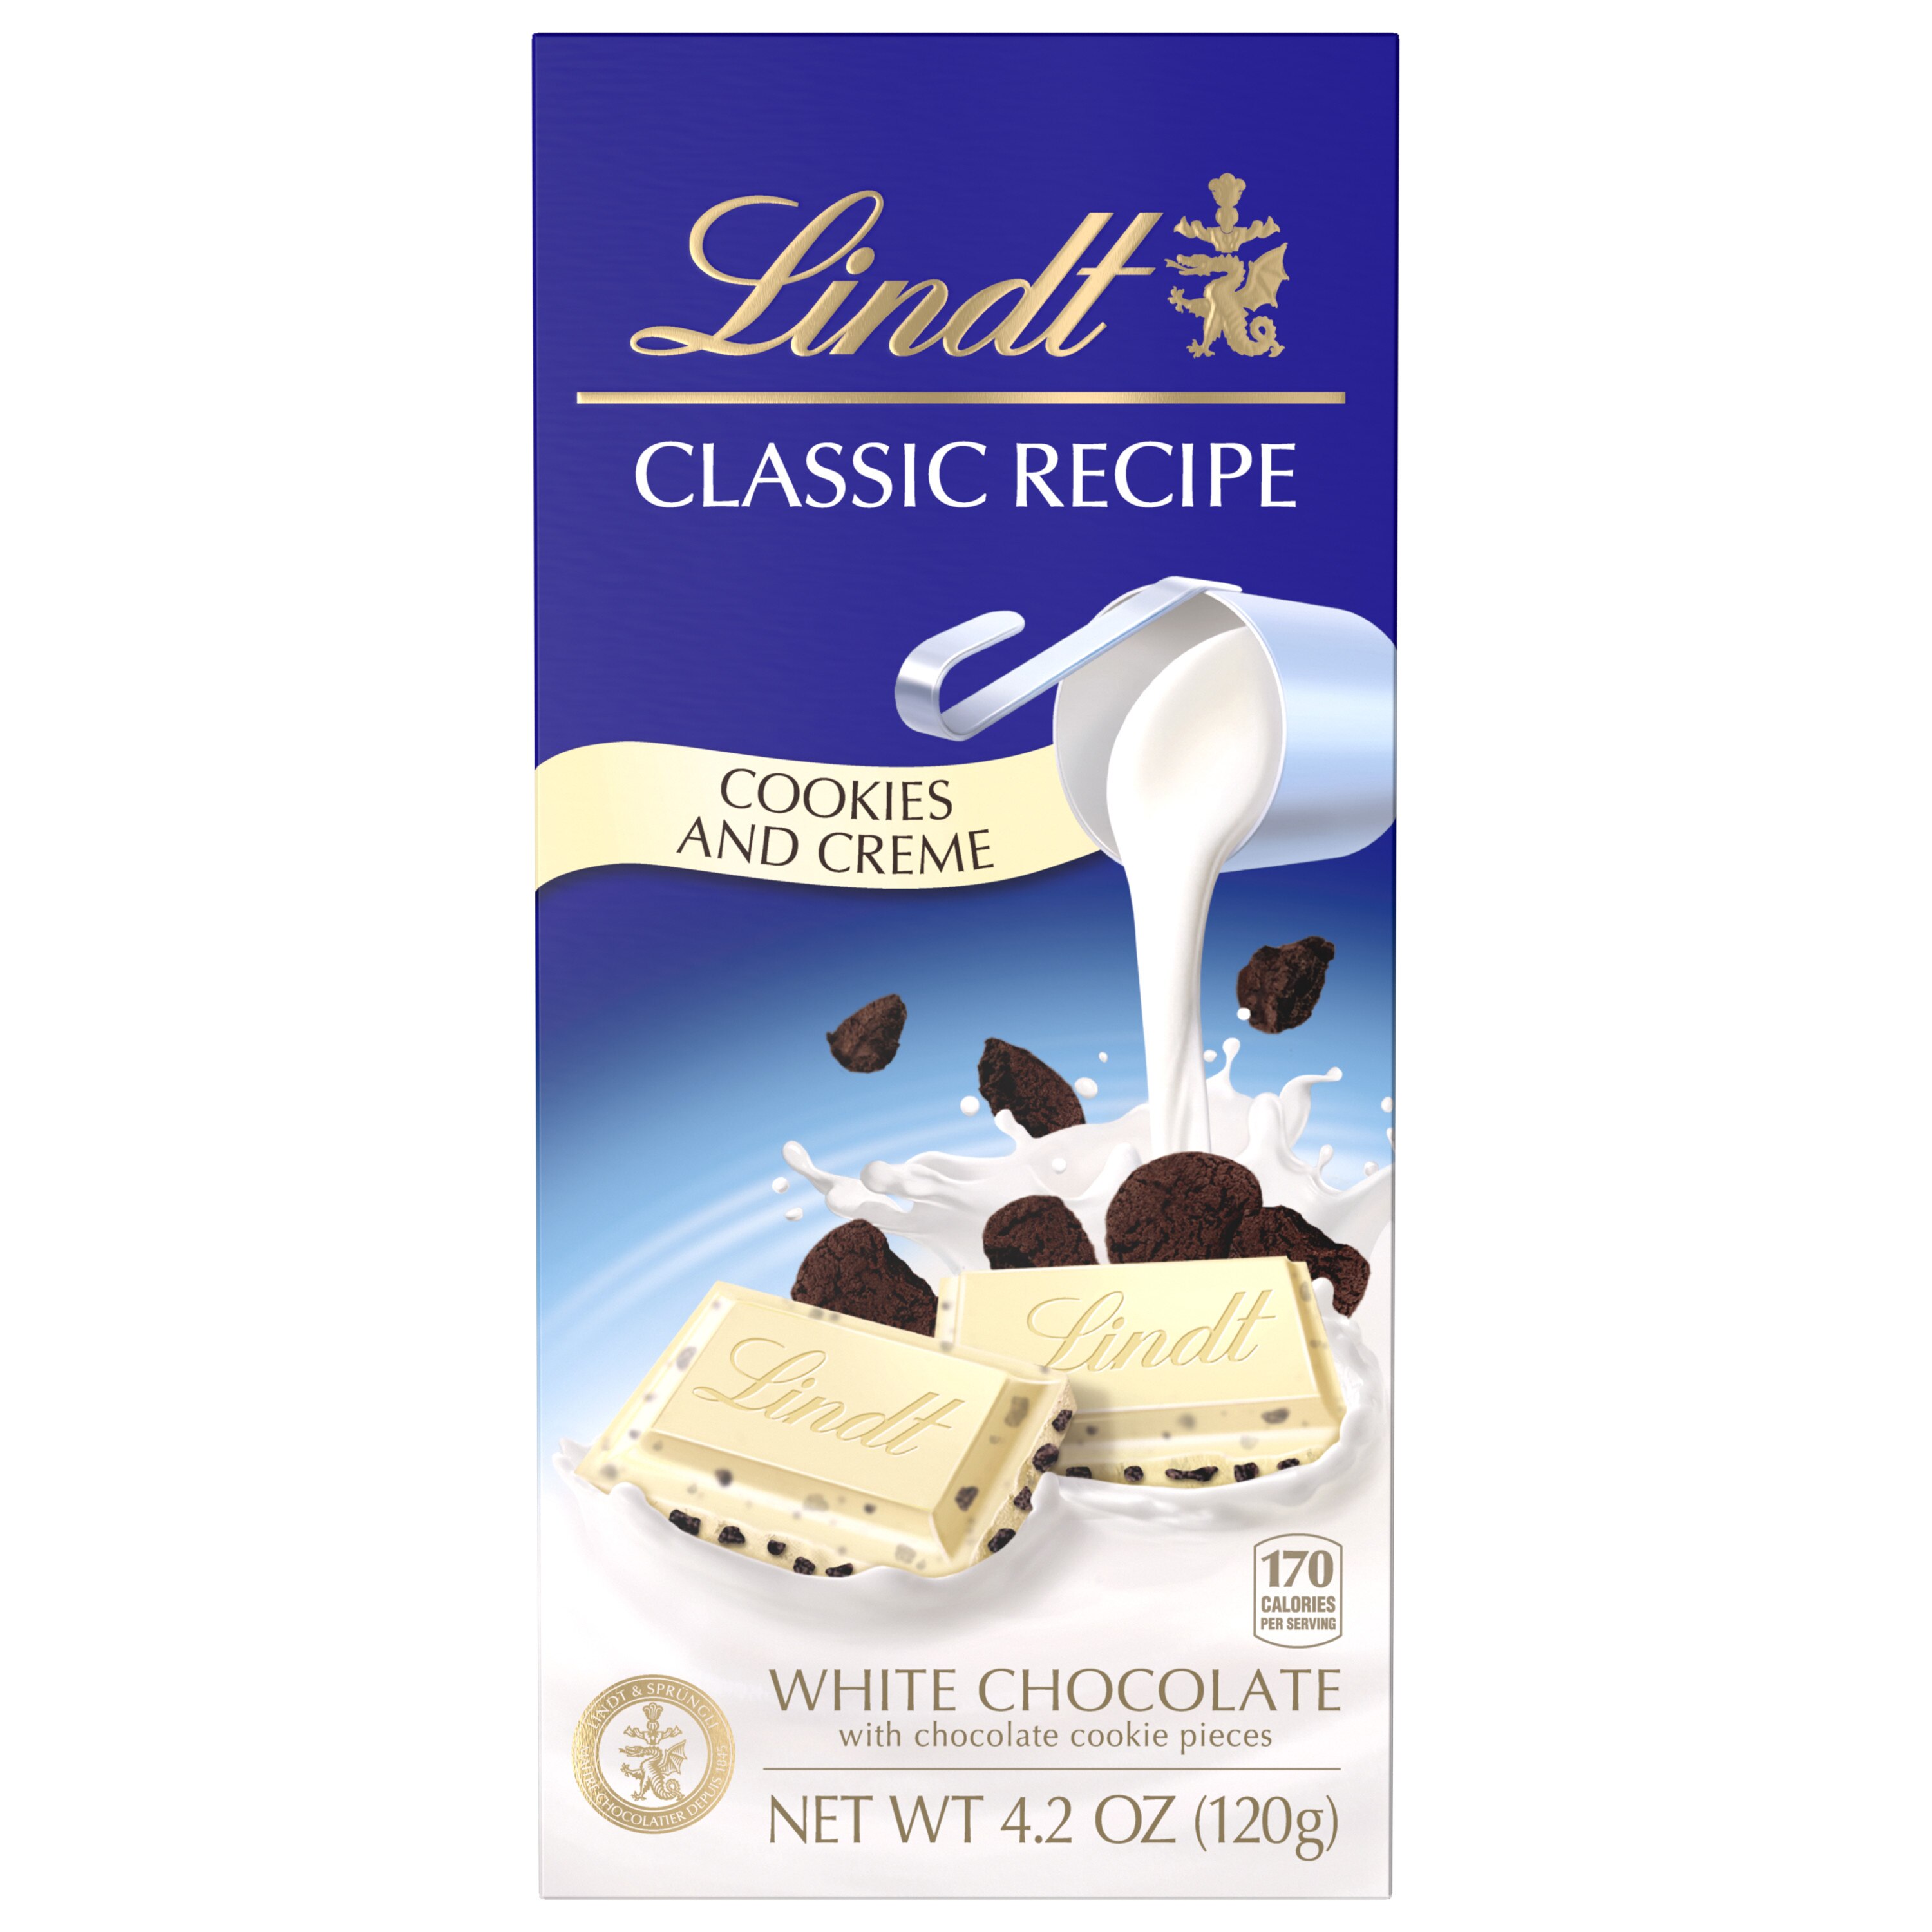 Lindt CLASSIC RECIPE Cookies and Creme White Chocolate Bar, 4.2 OZ